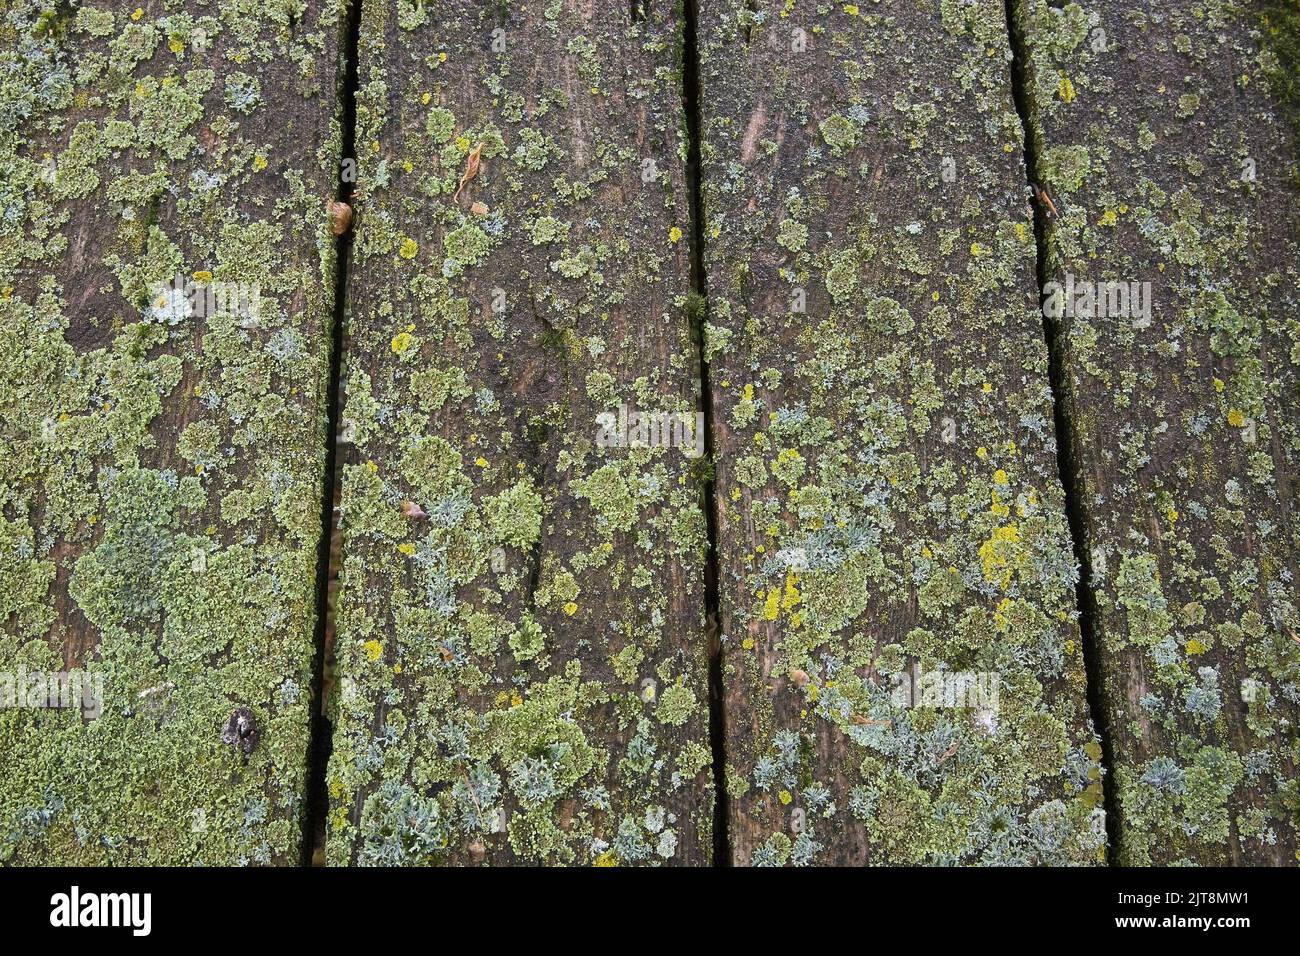 Close-up of the wooden planks on picnic table covered with green Bryophyta - Moss and lichen growth. Stock Photo